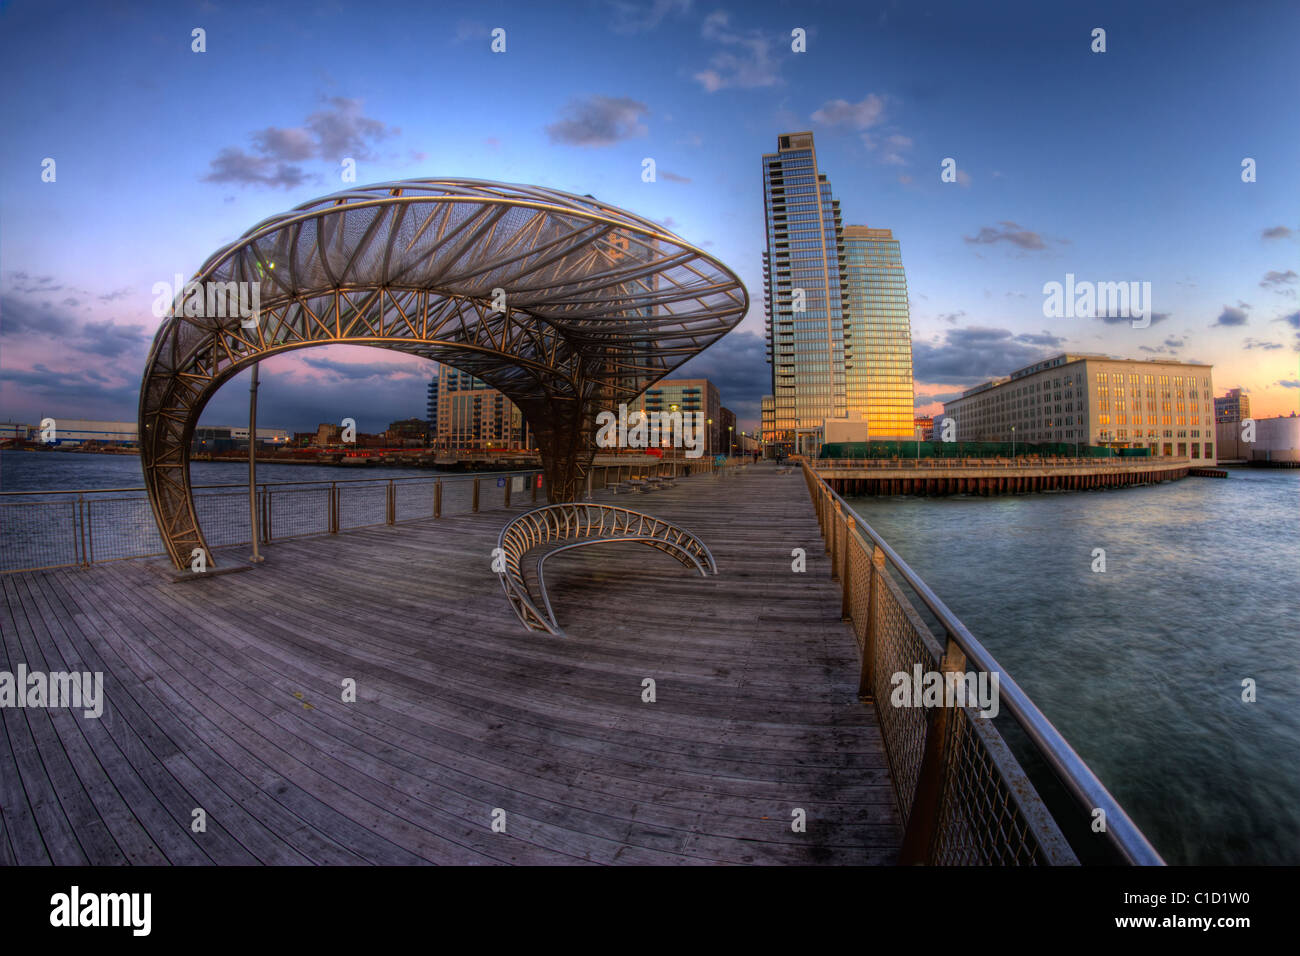 Fisheye view of the pier at Northside Piers development in Williamsburg, Brooklyn just after the sun has set Stock Photo